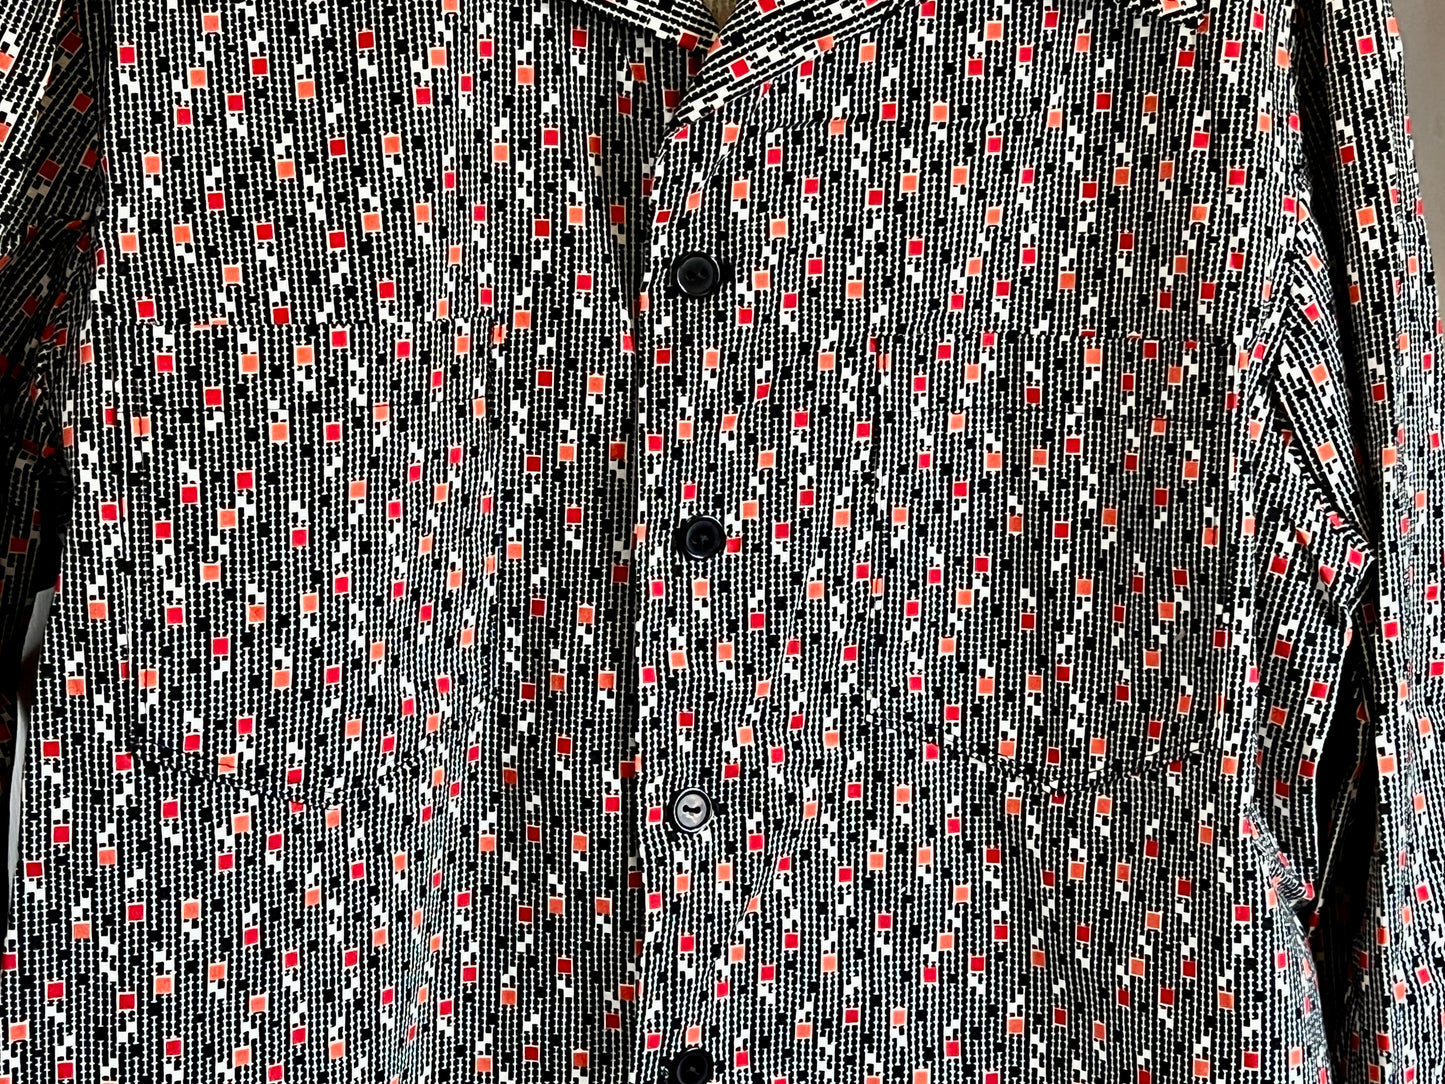 Pre Loved vintage 1950s style man’s shirt black red white geometric pattern S